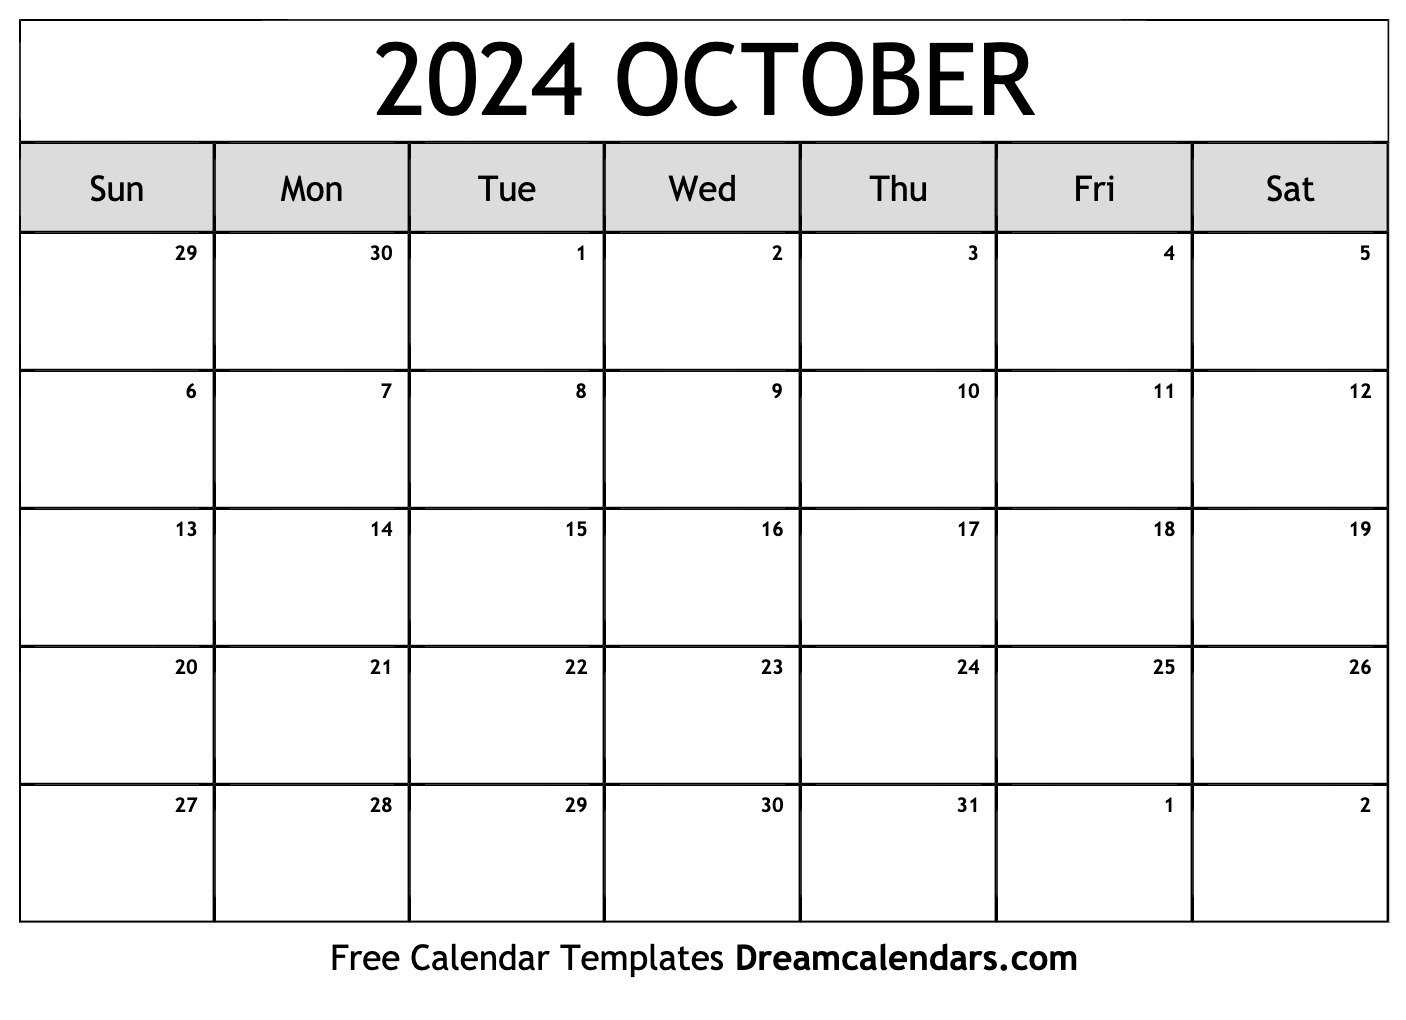 October 2024 Calendar | Free Blank Printable With Holidays intended for Free Printable Blank October Calendar 2024